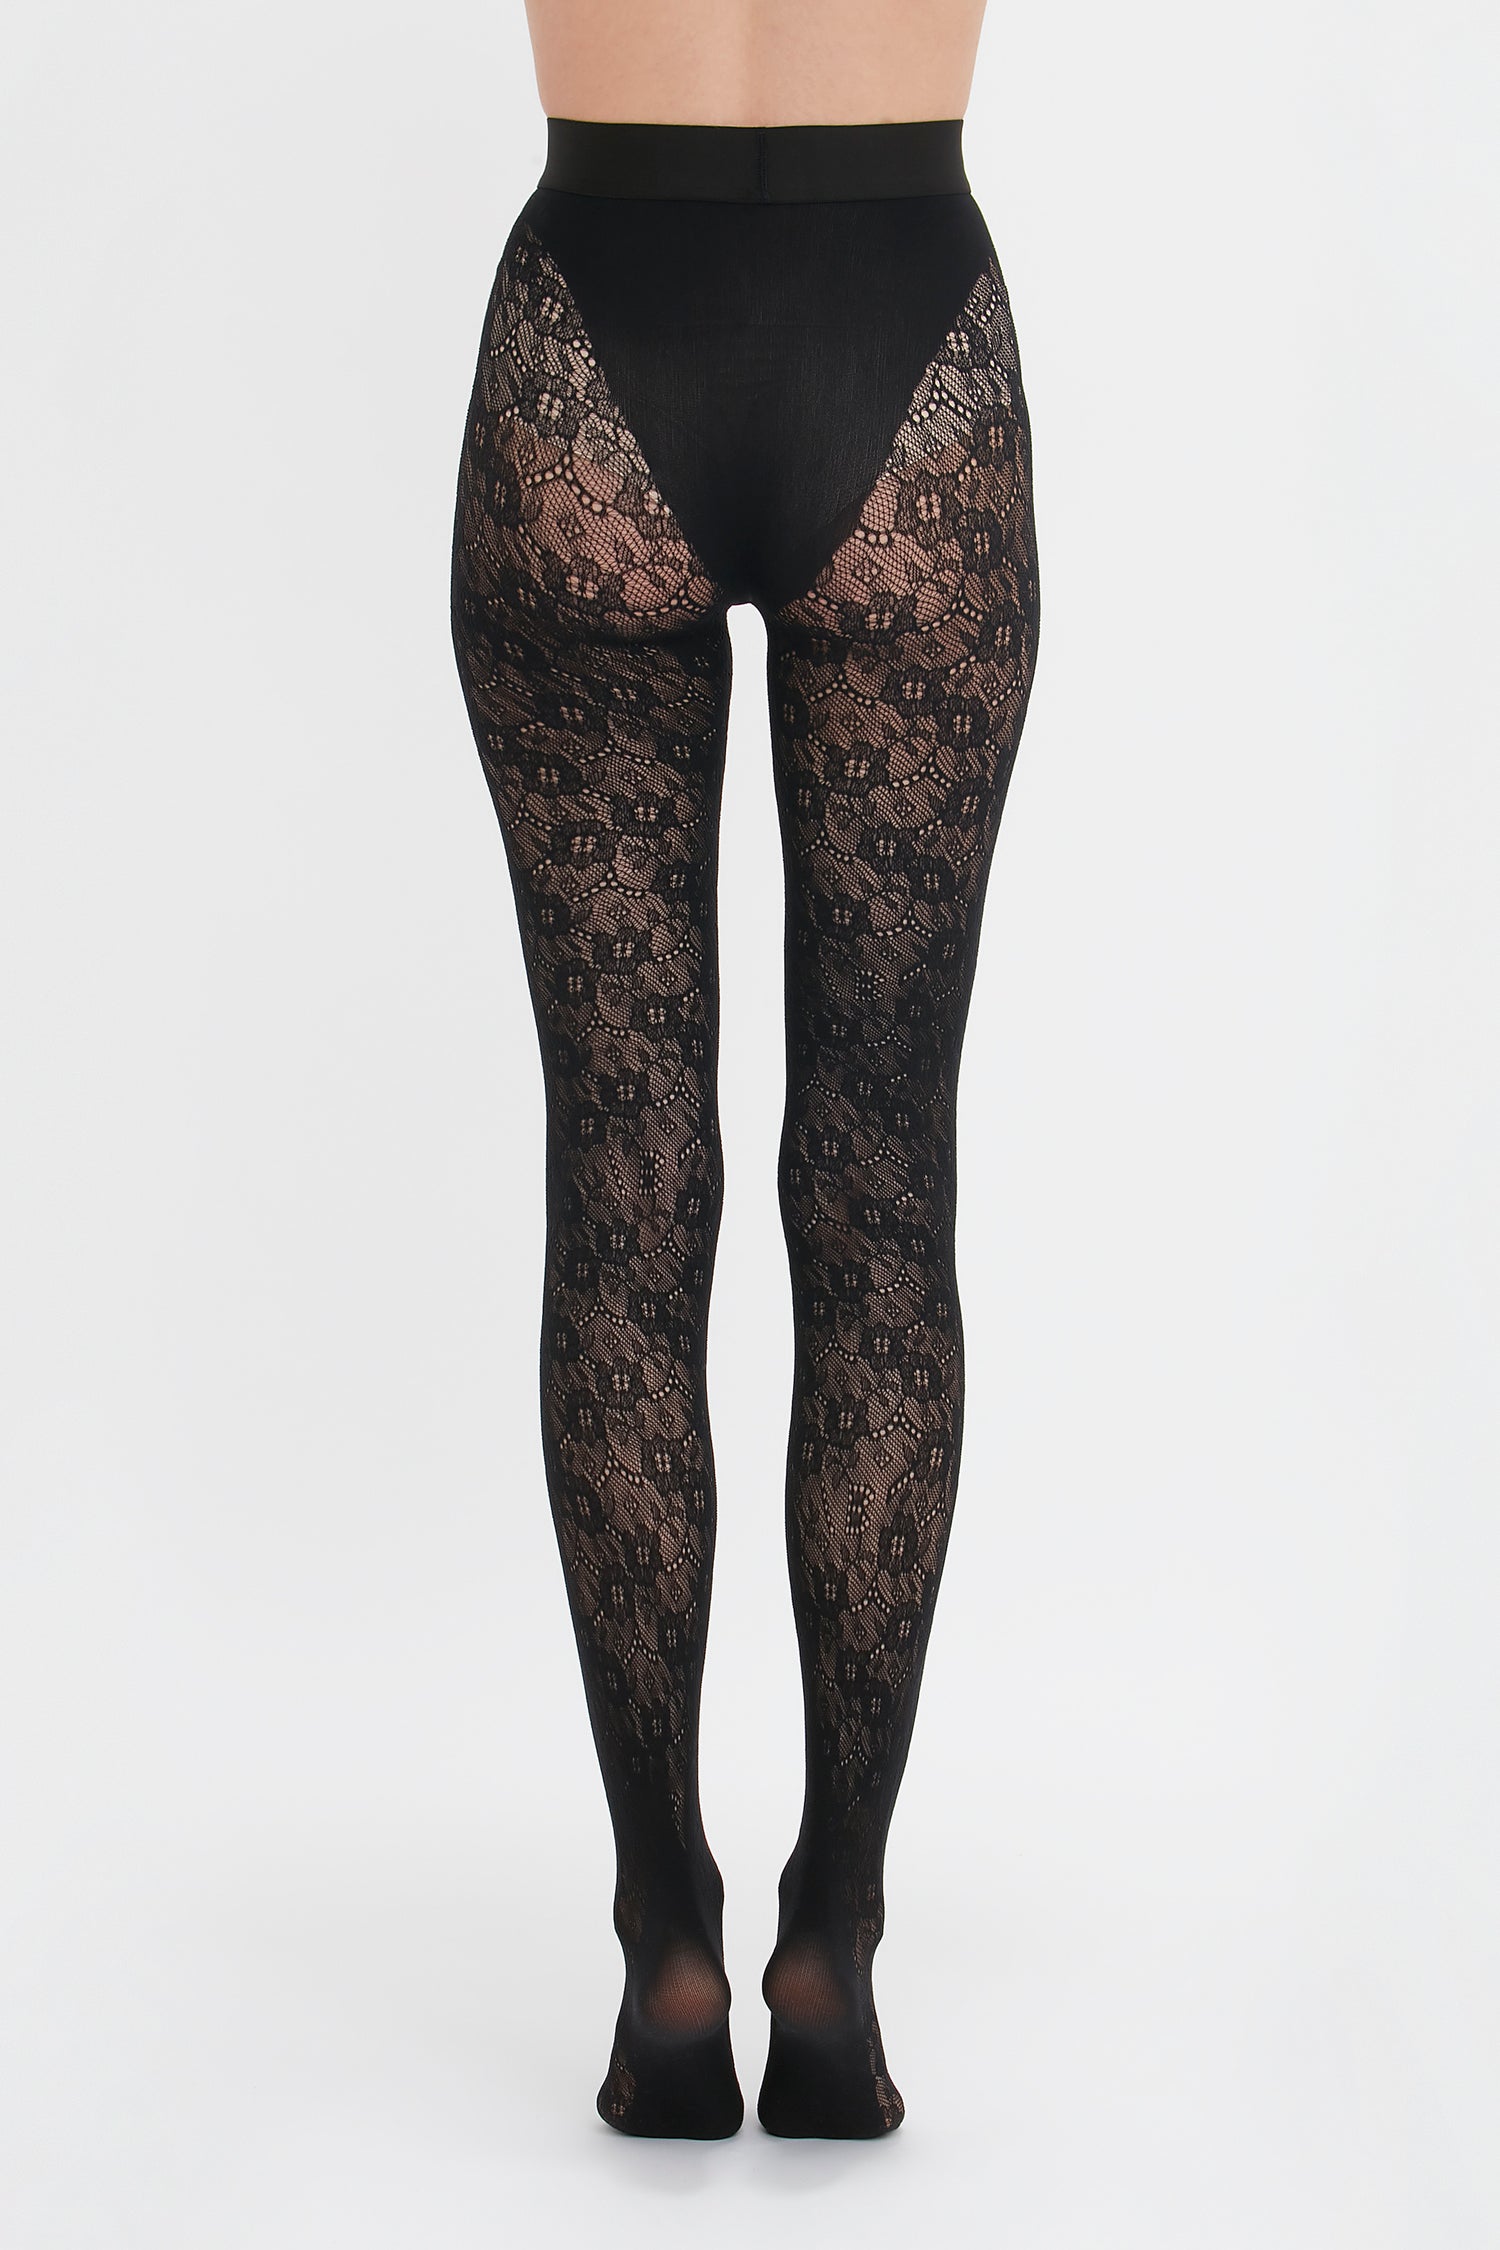 Victoria's Secret A Pantyhose and Tights for Women for sale